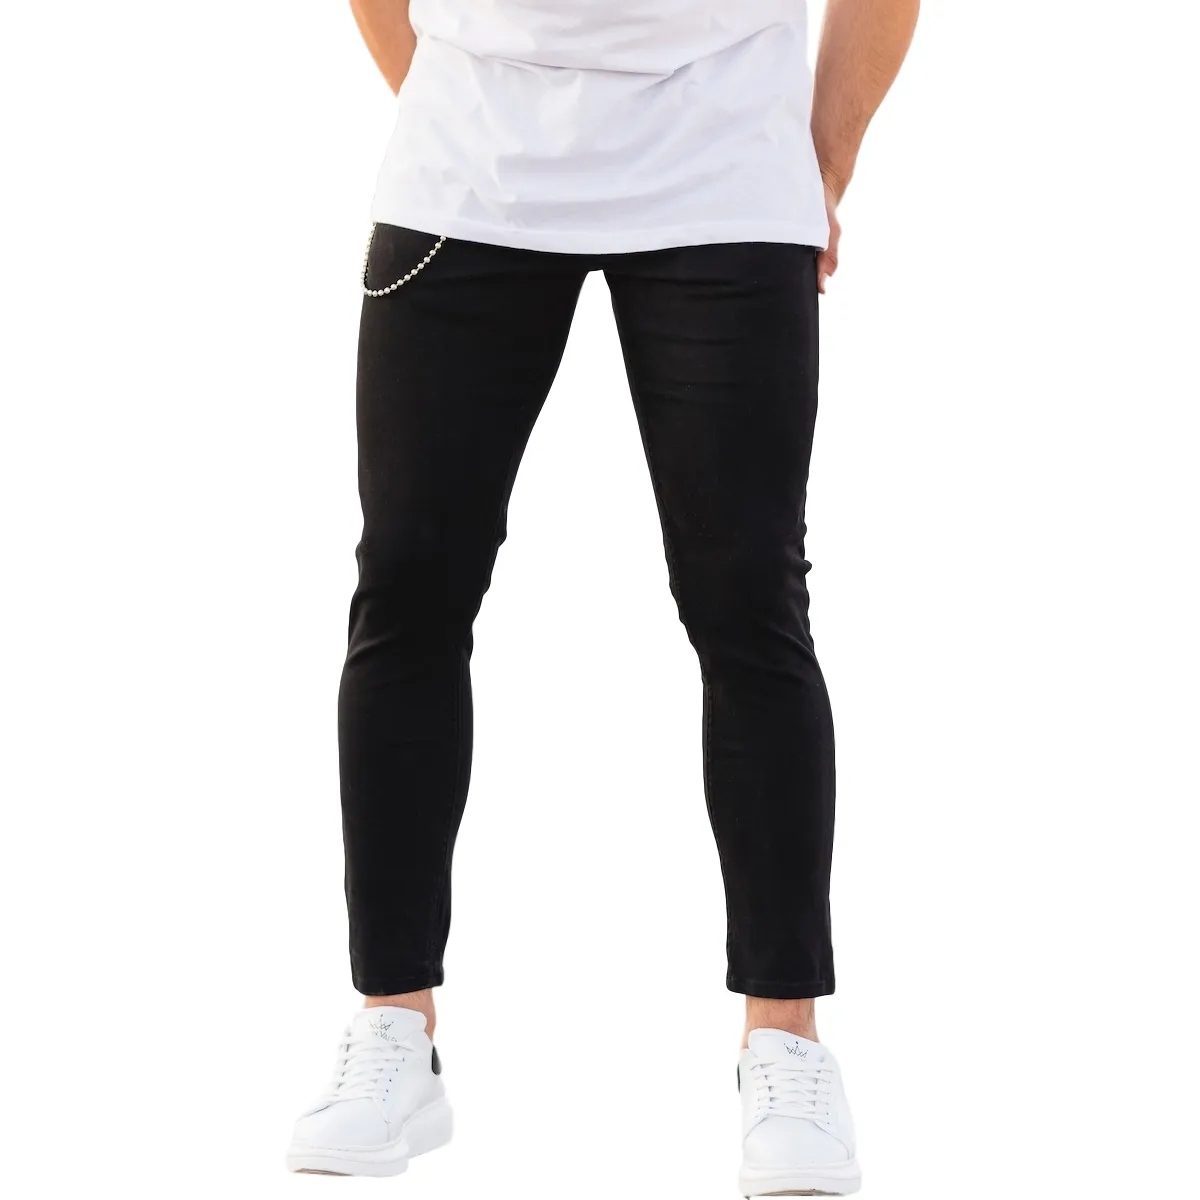 casual 100% cotton denim men basic black jeans with chain man new style good best price wholesale offer trend 2020